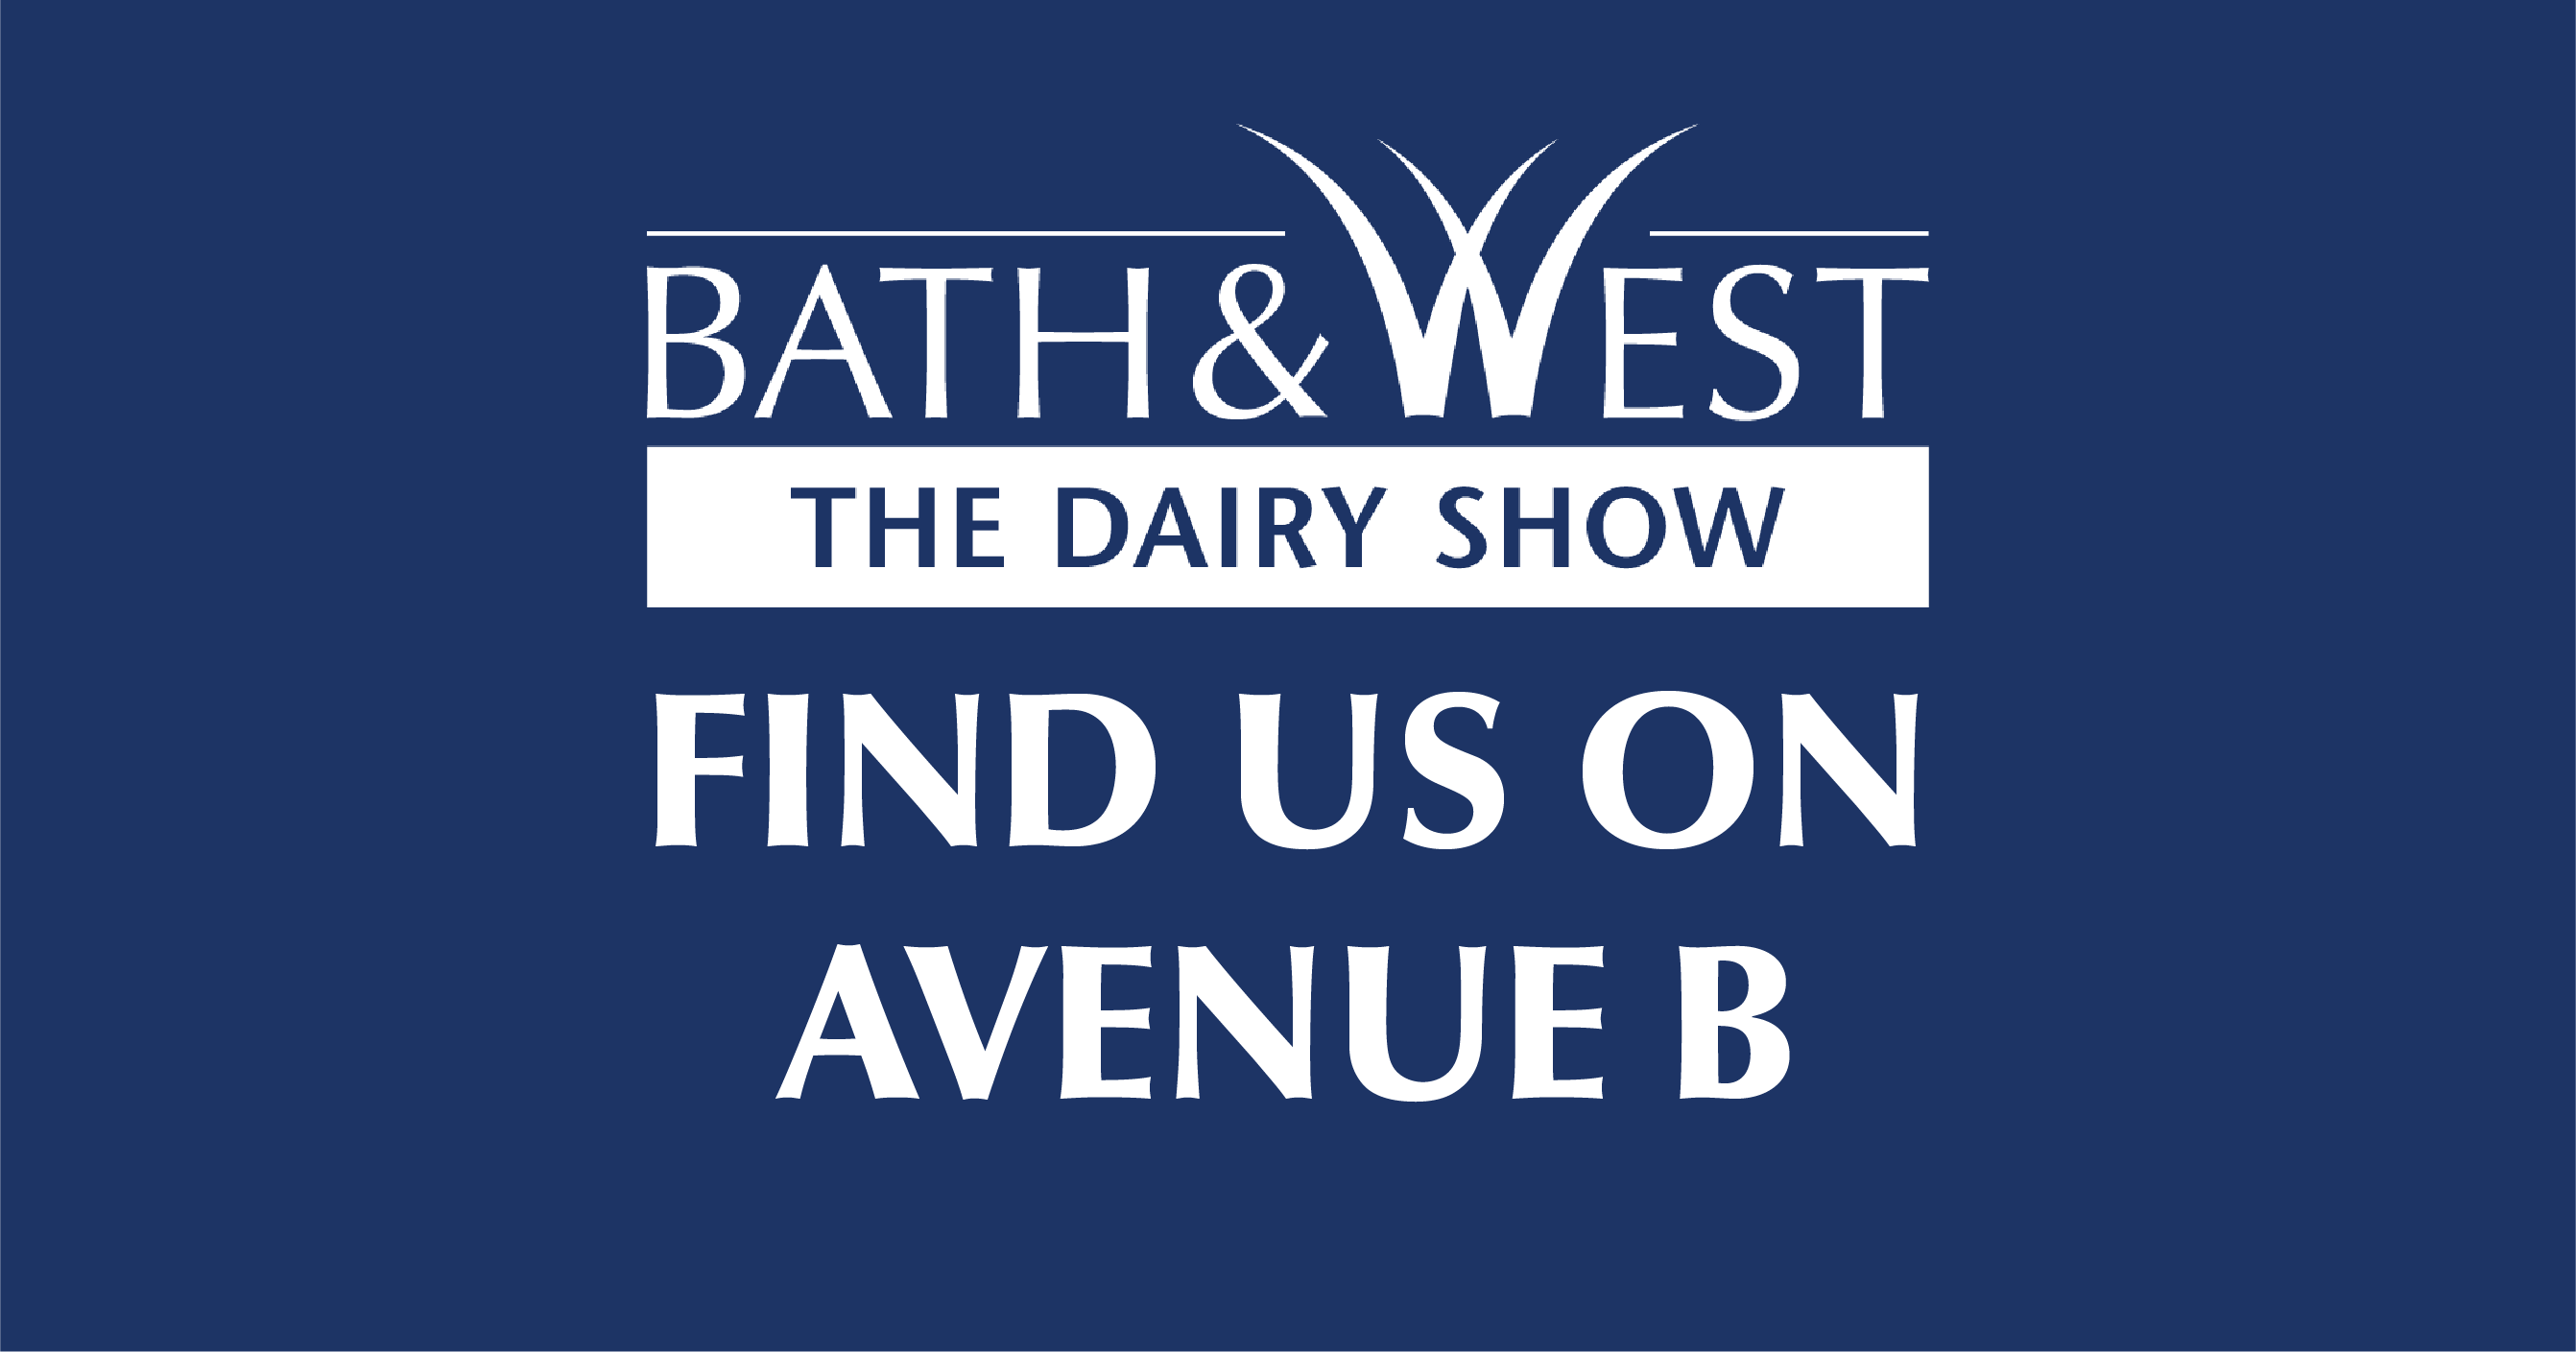 THE DAIRY SHOW